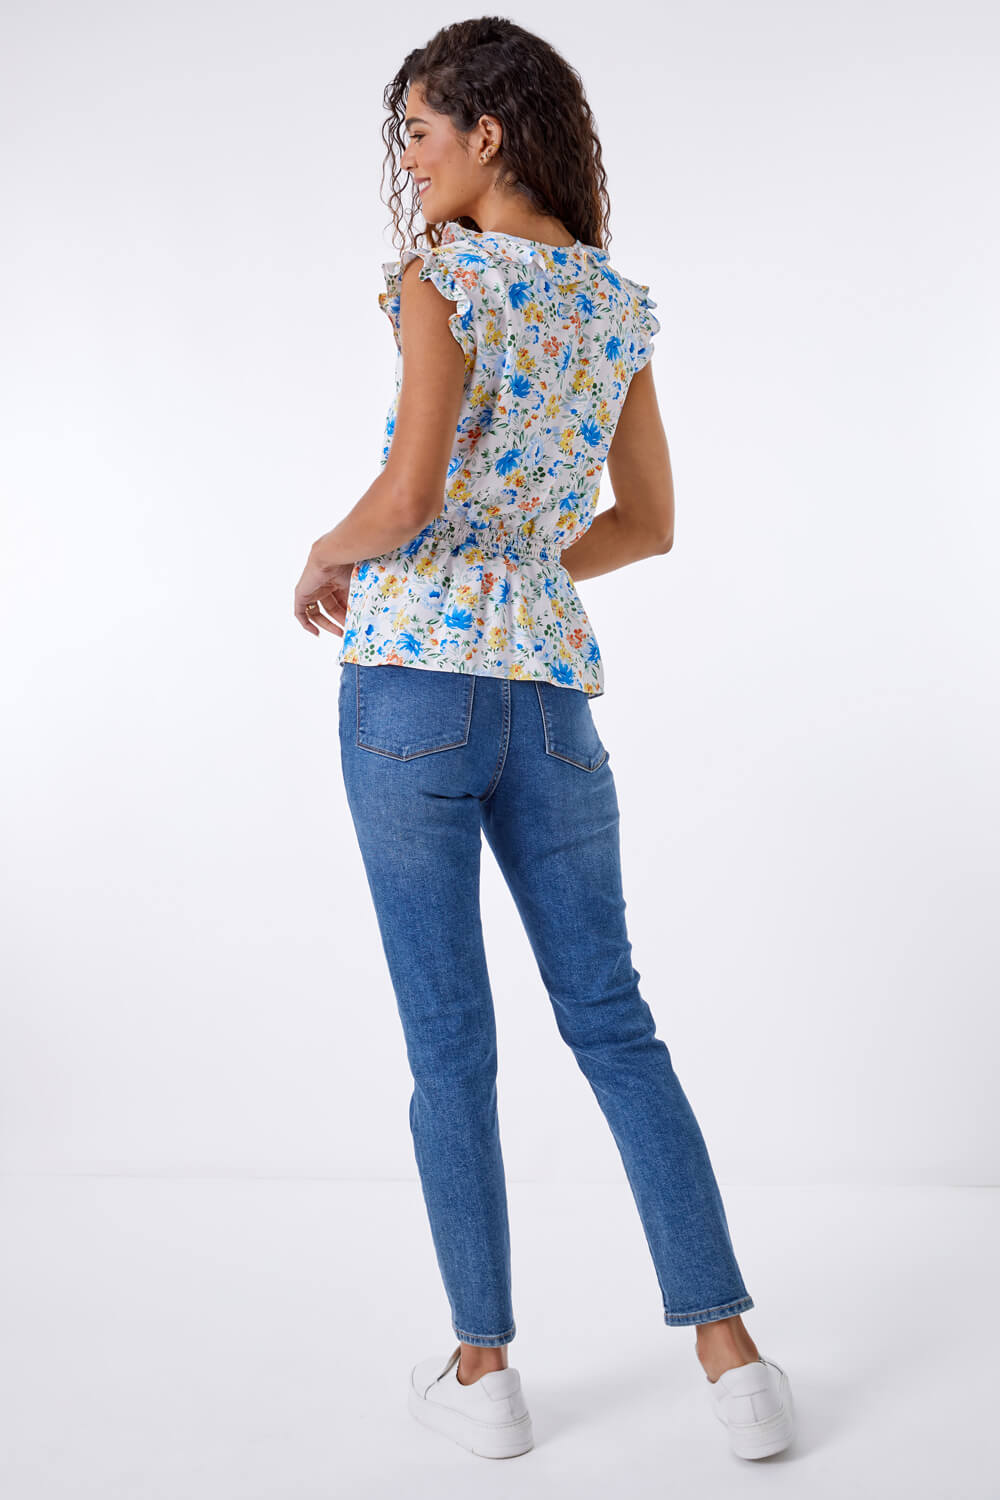 Blue Floral Print Frill Detail Top, Image 3 of 5